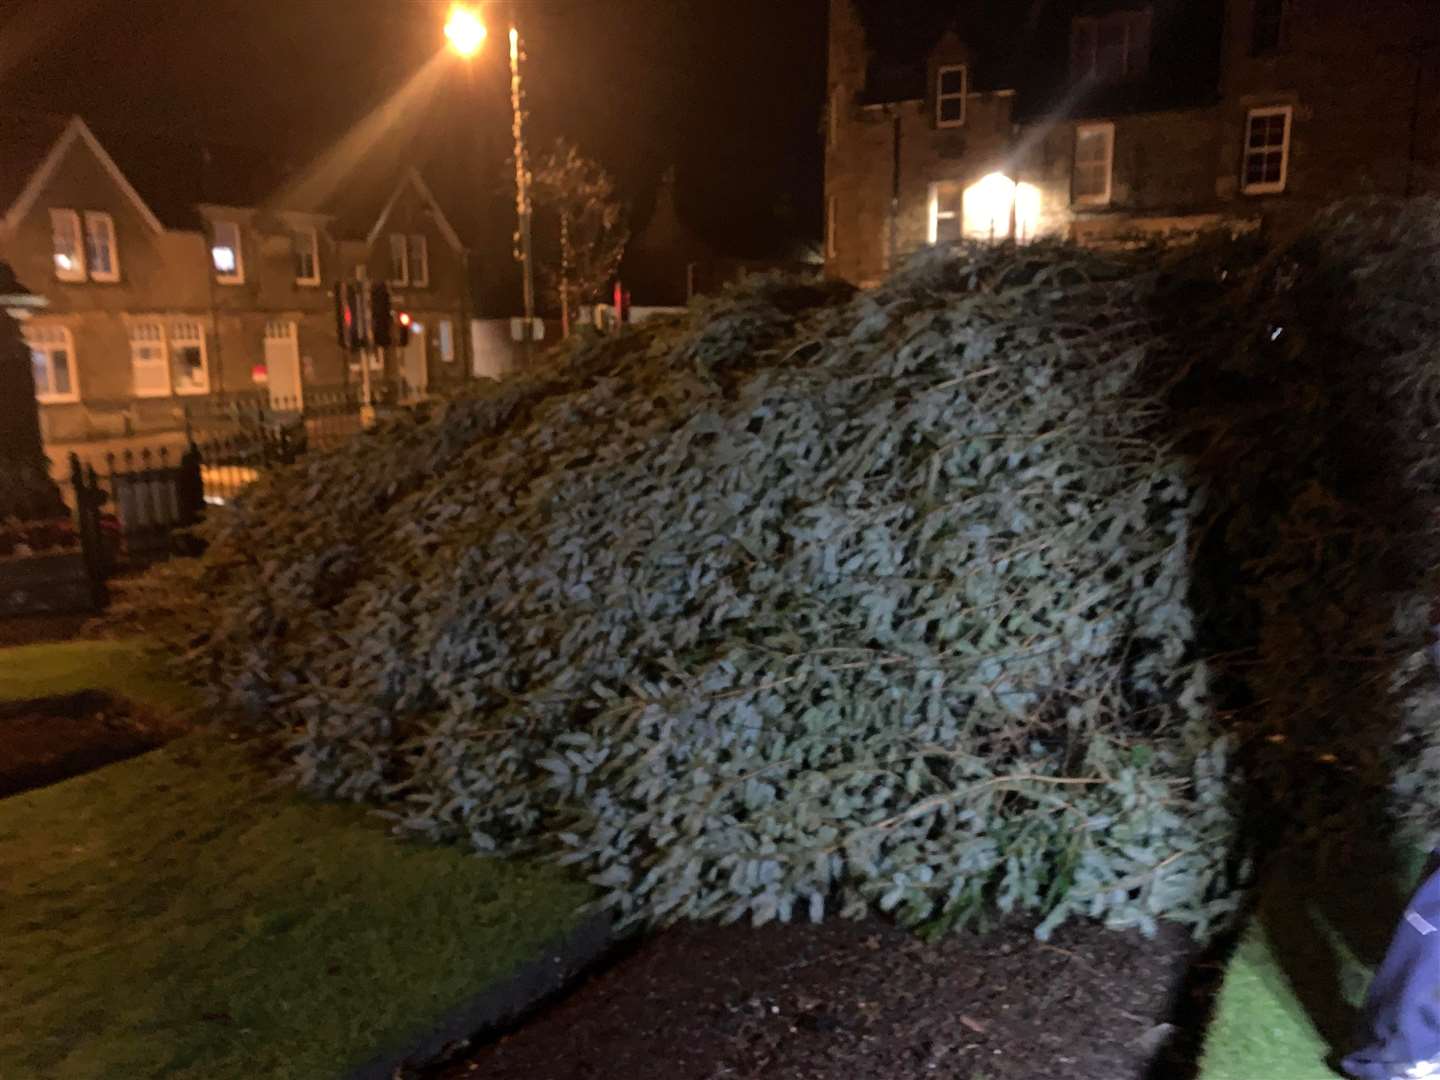 The tree after falling down in the winds on Wednesday night. Picture: Mark Rosie.